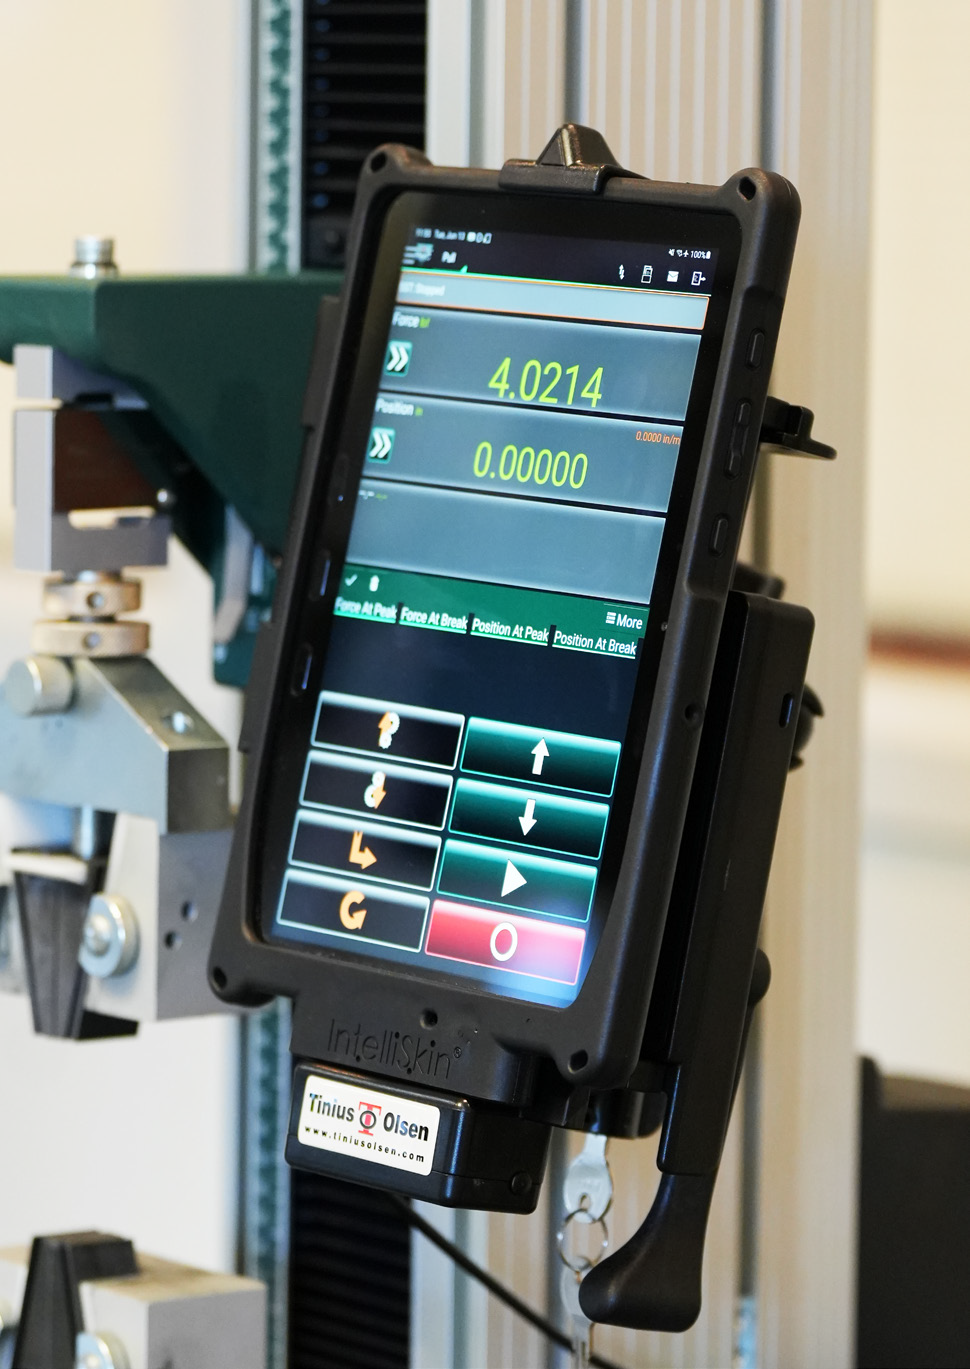 Tinius Olsen's HMC 3.0: Wireless Bluetooth Handheld Interface for SL and ST Series Testers